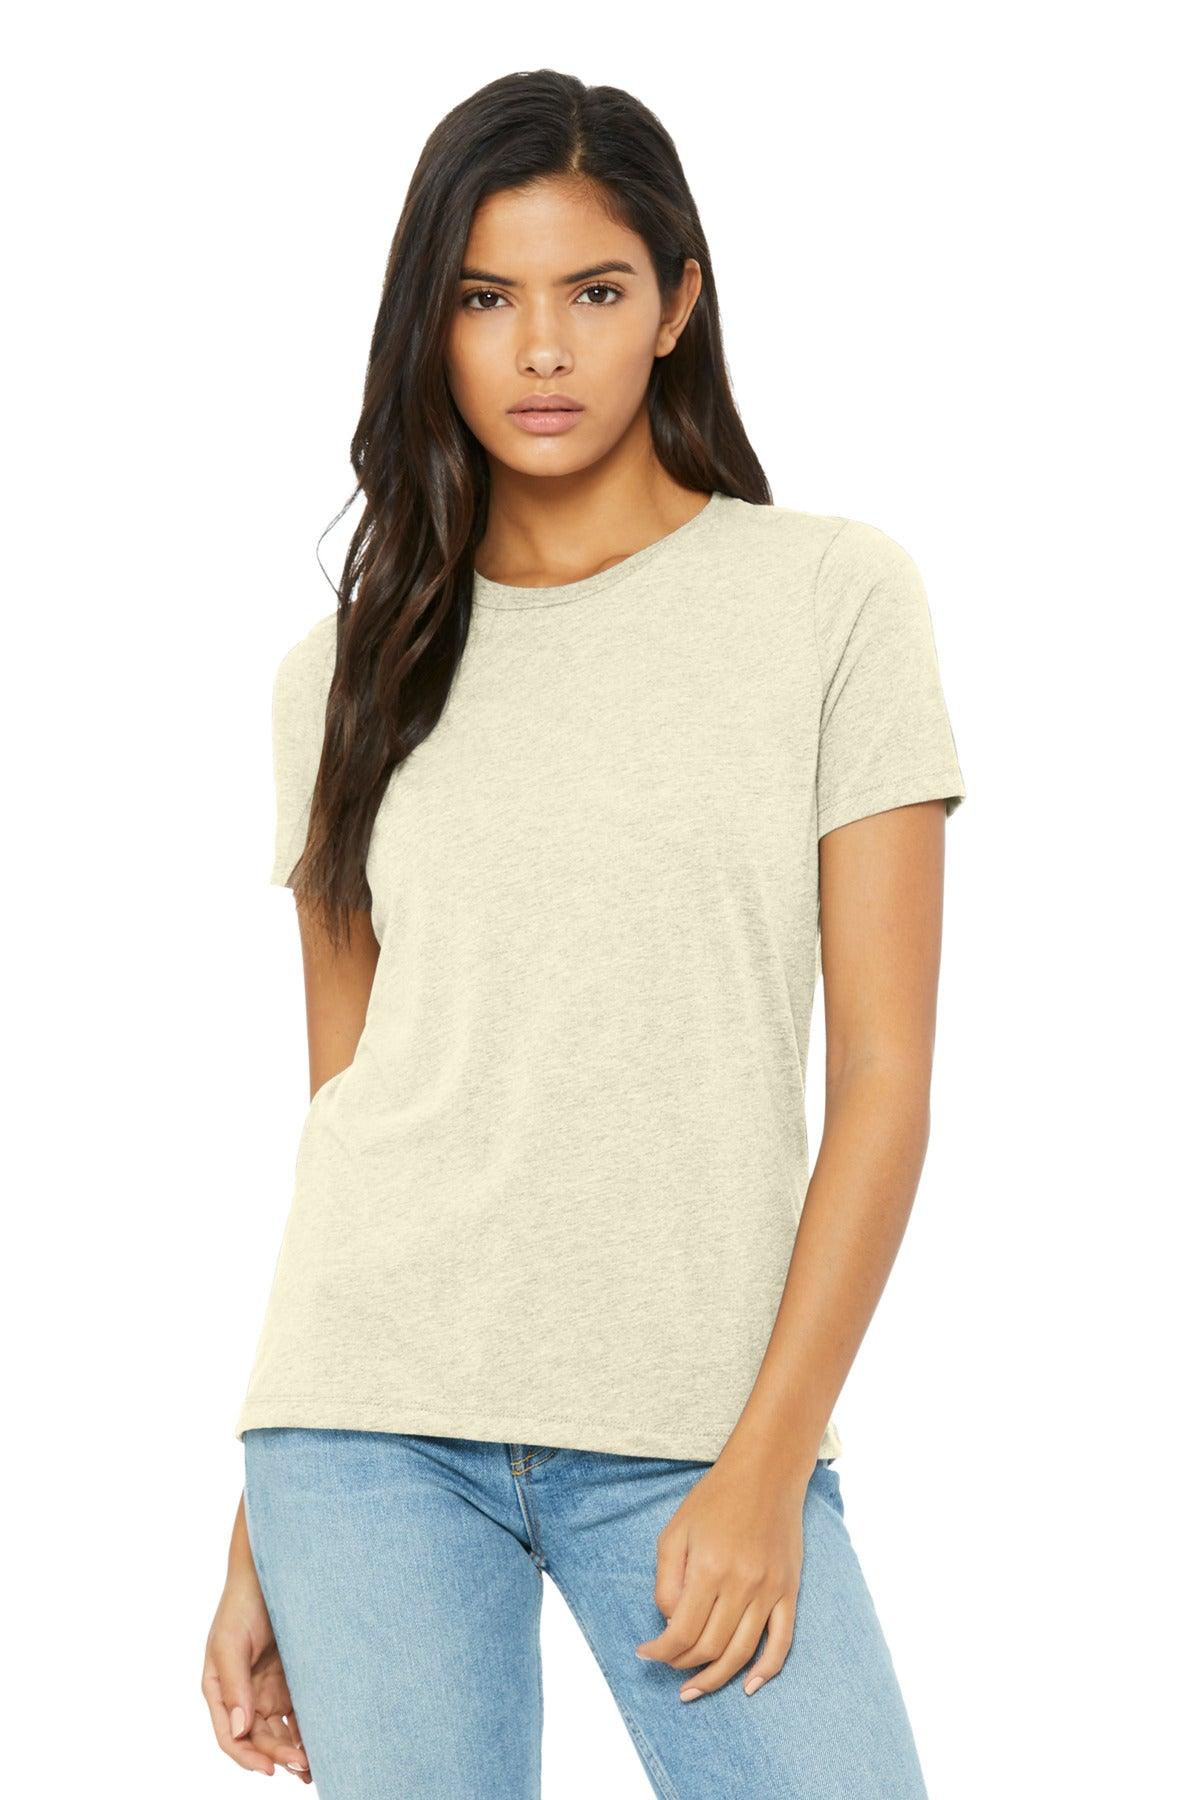 BELLA+CANVAS Women's Relaxed Triblend Tee BC6413 - Dresses Max